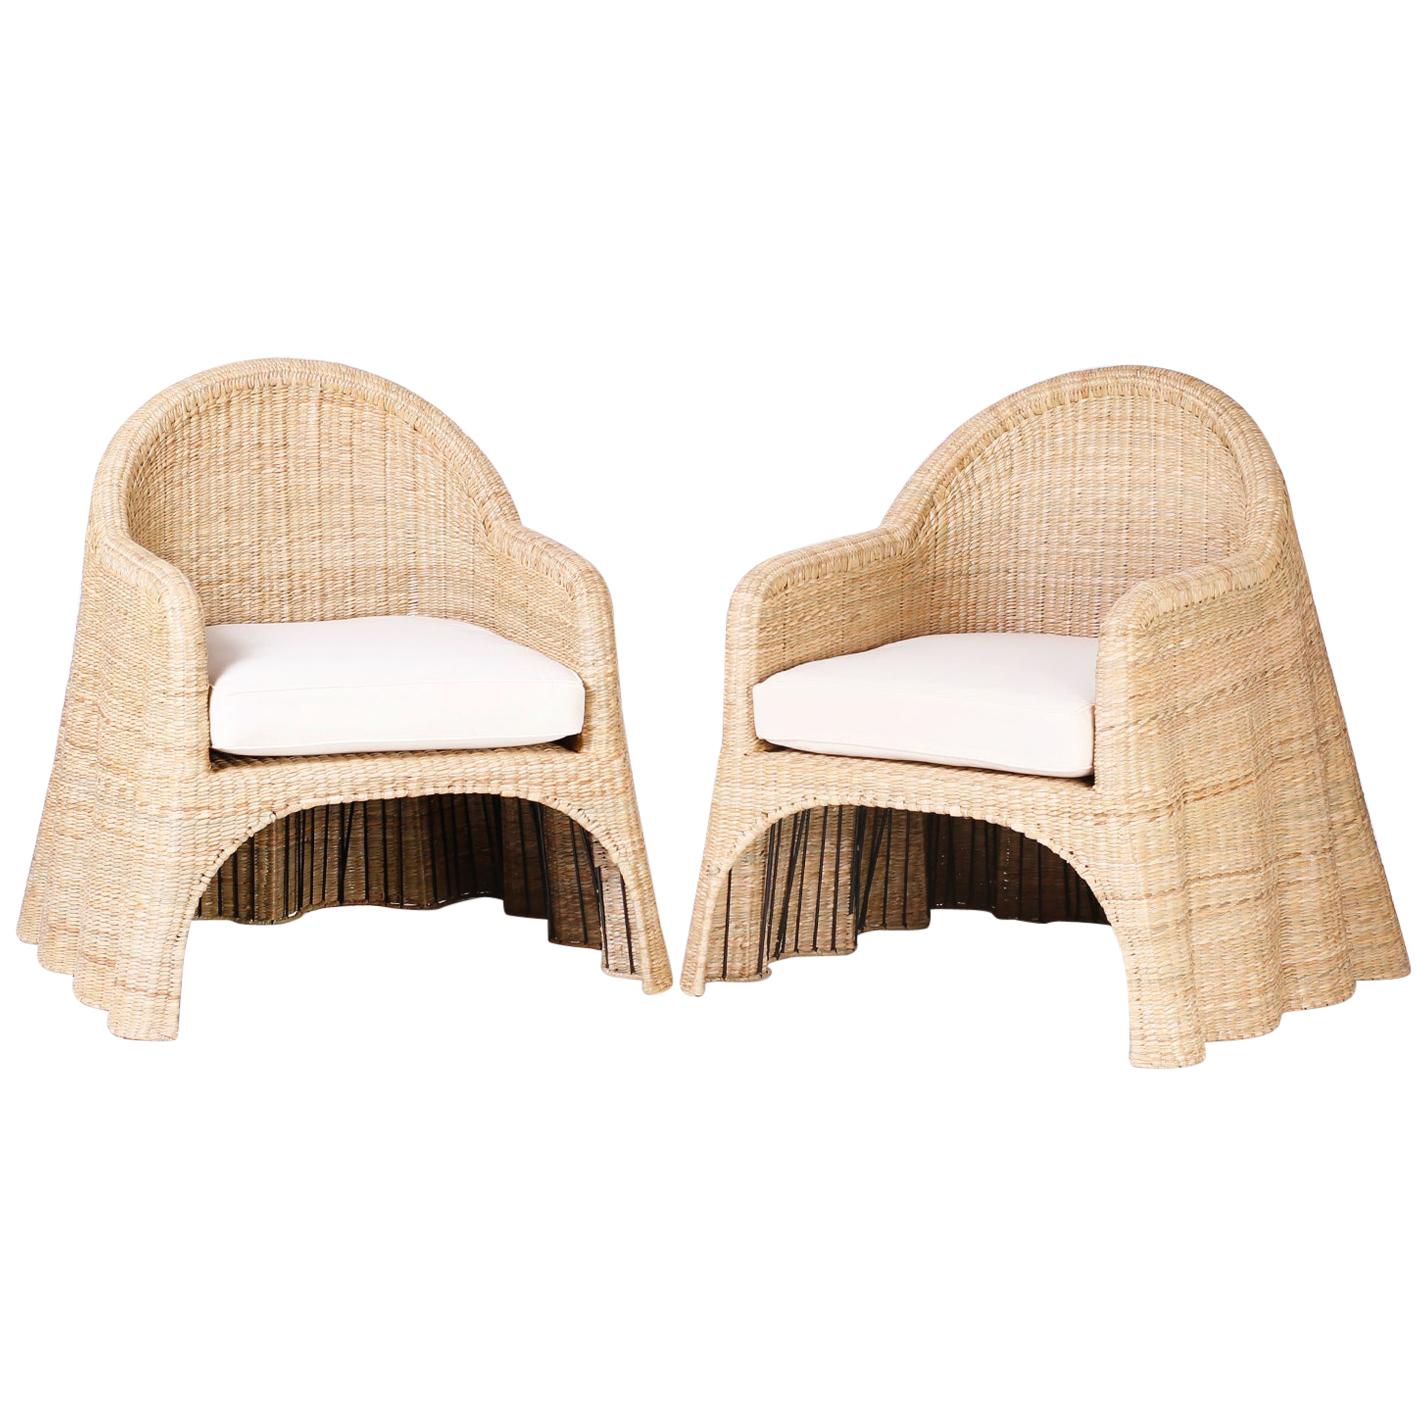 Wicker Drapery Ghost Armchairs with Open Fronts, Priced Individually